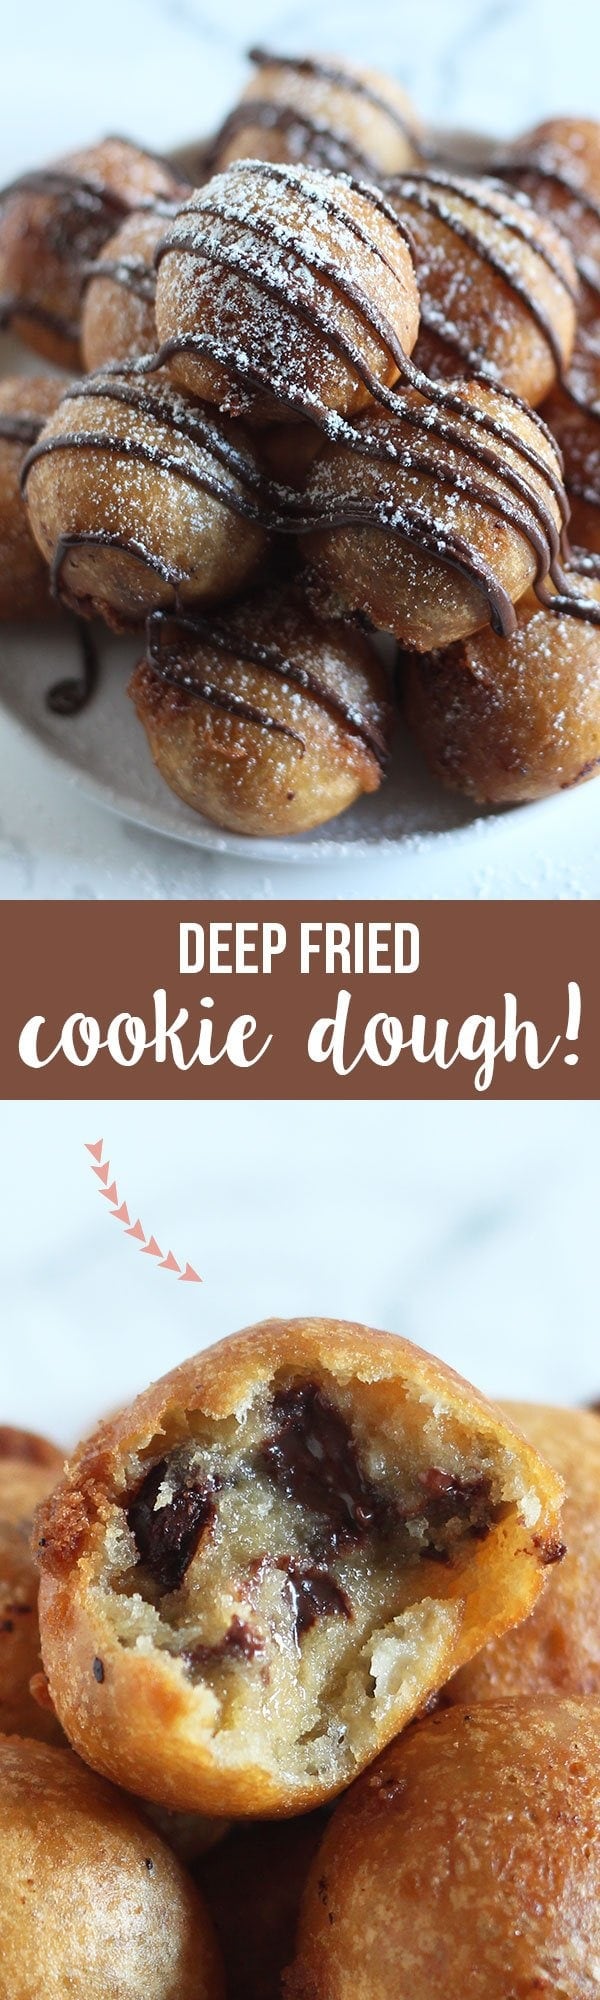 OMG possibly the BESt thing I've ever eaten! Deep Fried Cookie Dough made with homemade chocolate chip cookie dough, dipped in batter, and fried to golden crispy perfection!